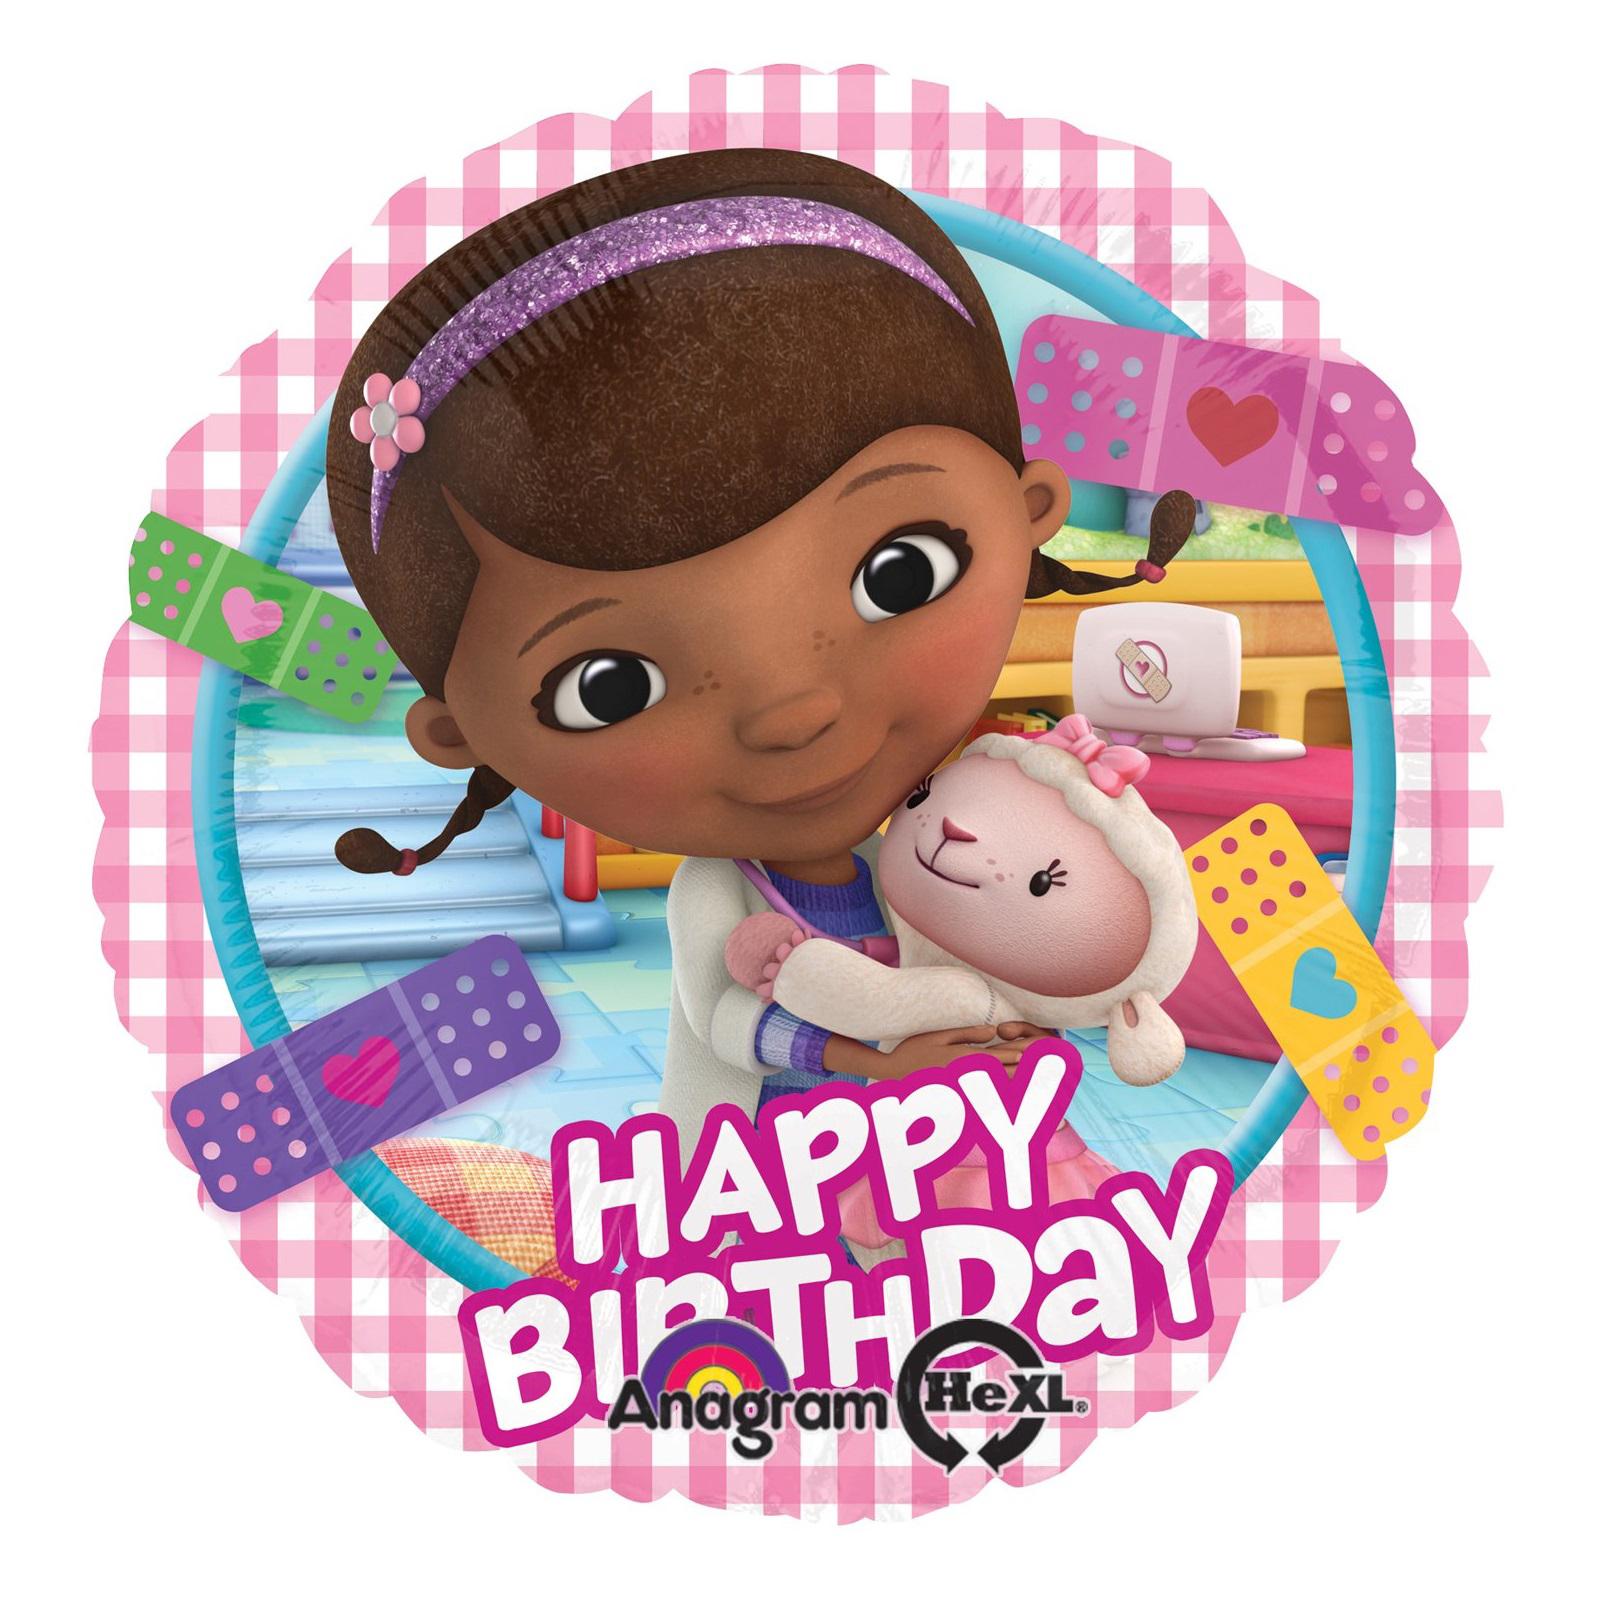 15 Awesome Doc McStuffins Cake Ideas & Designs (Perfect For Birthdays) |  Doc mcstuffins birthday party ideas cake, Doc mcstuffins birthday, Doc  mcstuffins birthday cake